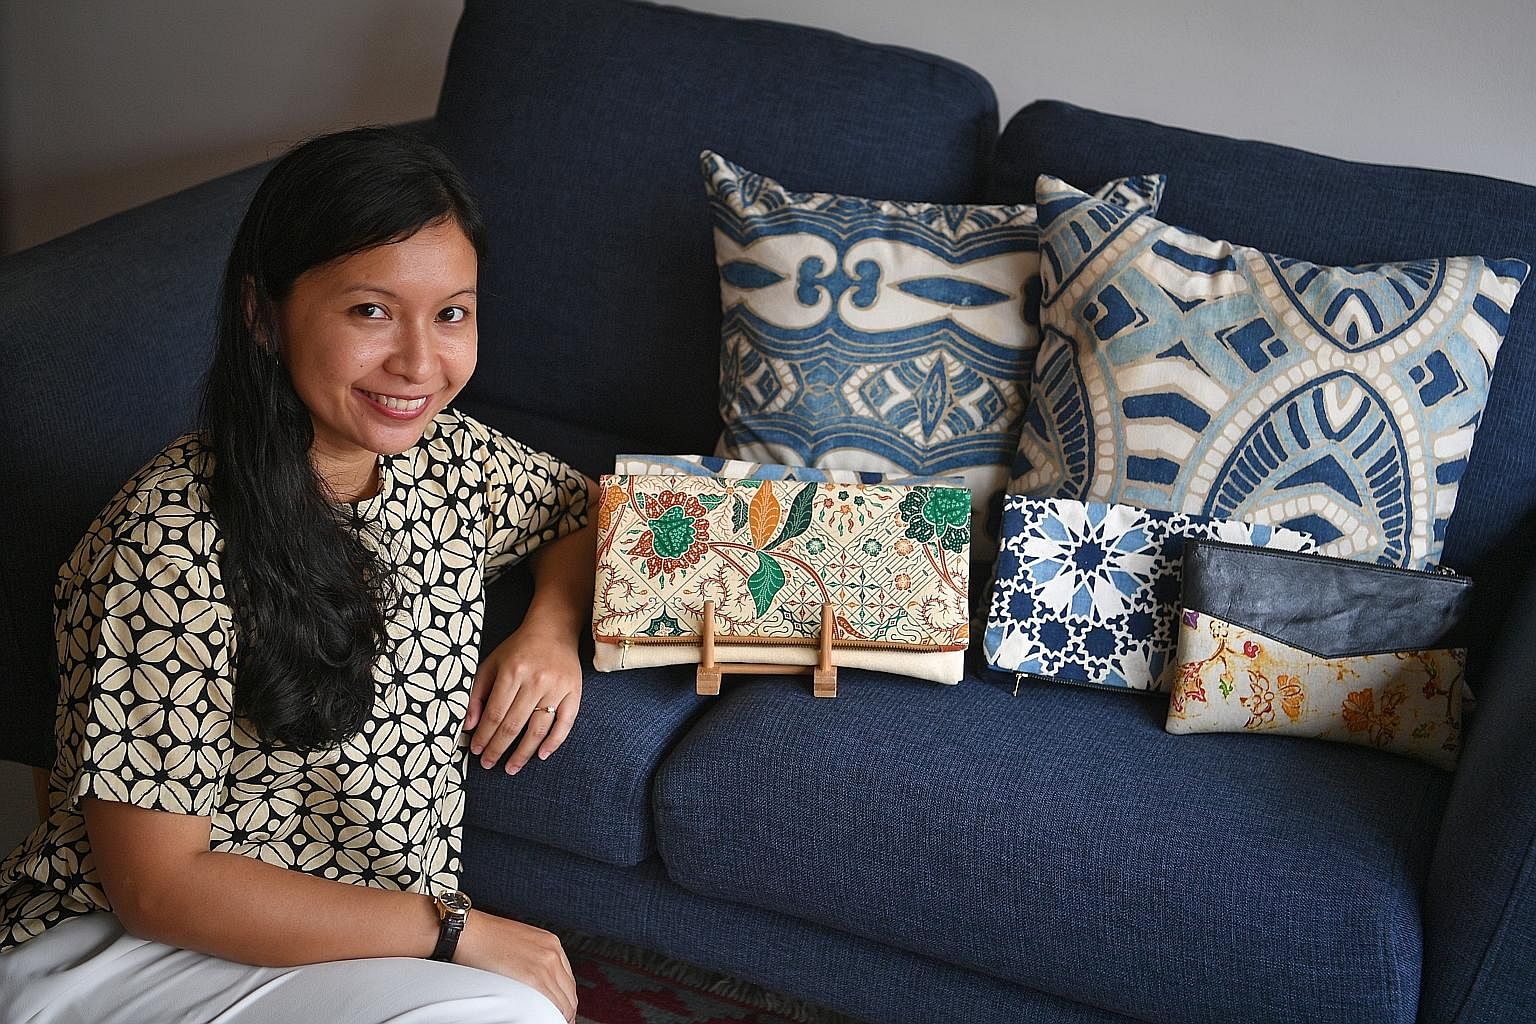 Ms Nur Aqilah Zailan designs and releases a new collection of batik clutches - her best-selling items - every two months under her label Gypsied. Each collection has up to 40 clutches.